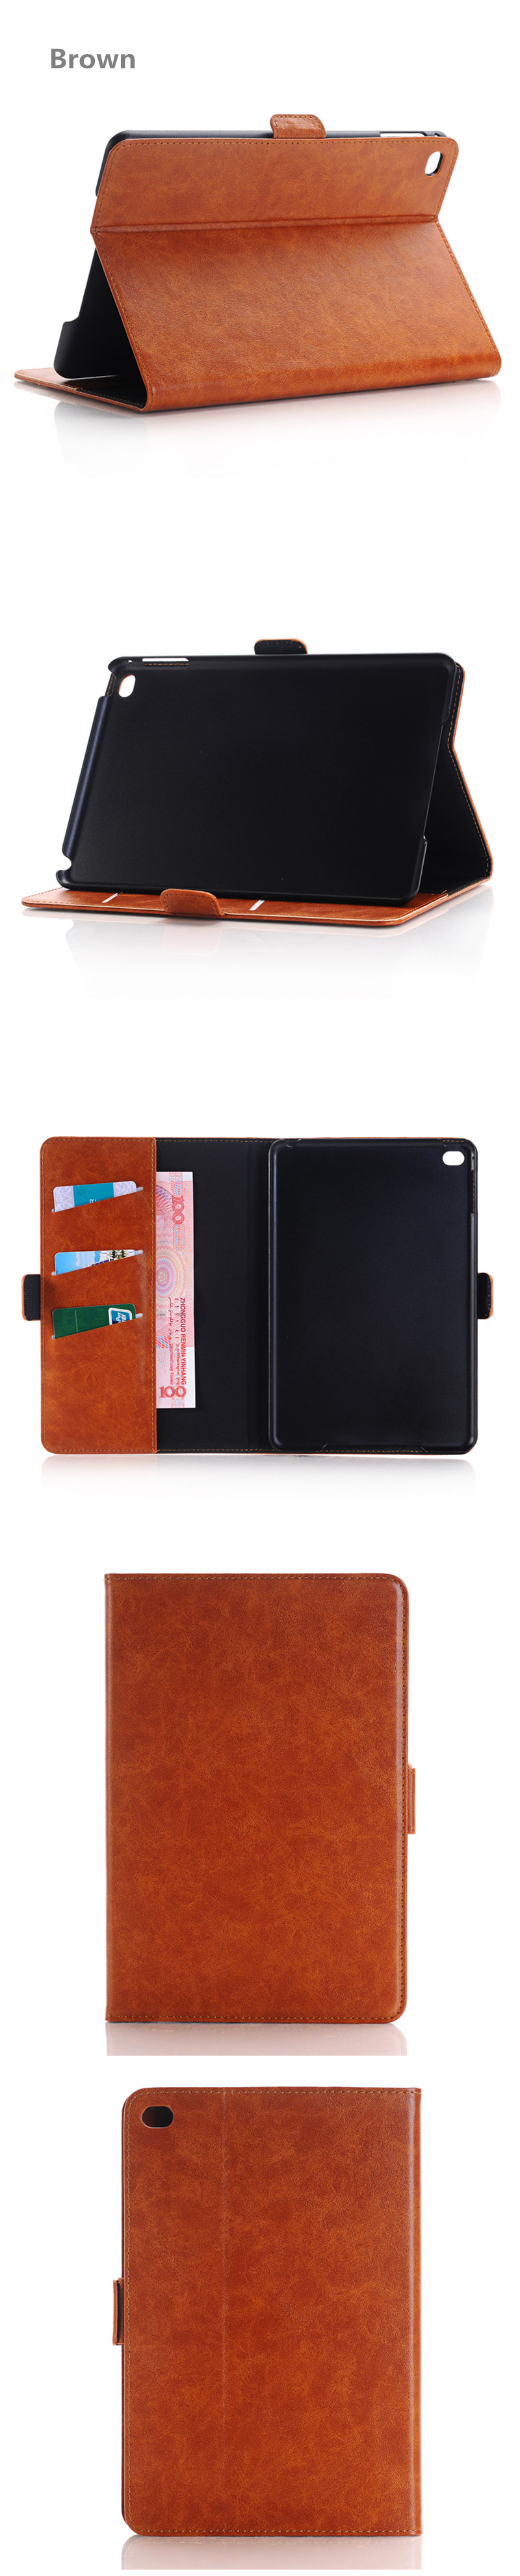 WLD-A005-Belt-Buckle-Shell-Flip-PU-Leather--Protective-Cases-For-iPad-Mini-4-1013508-5